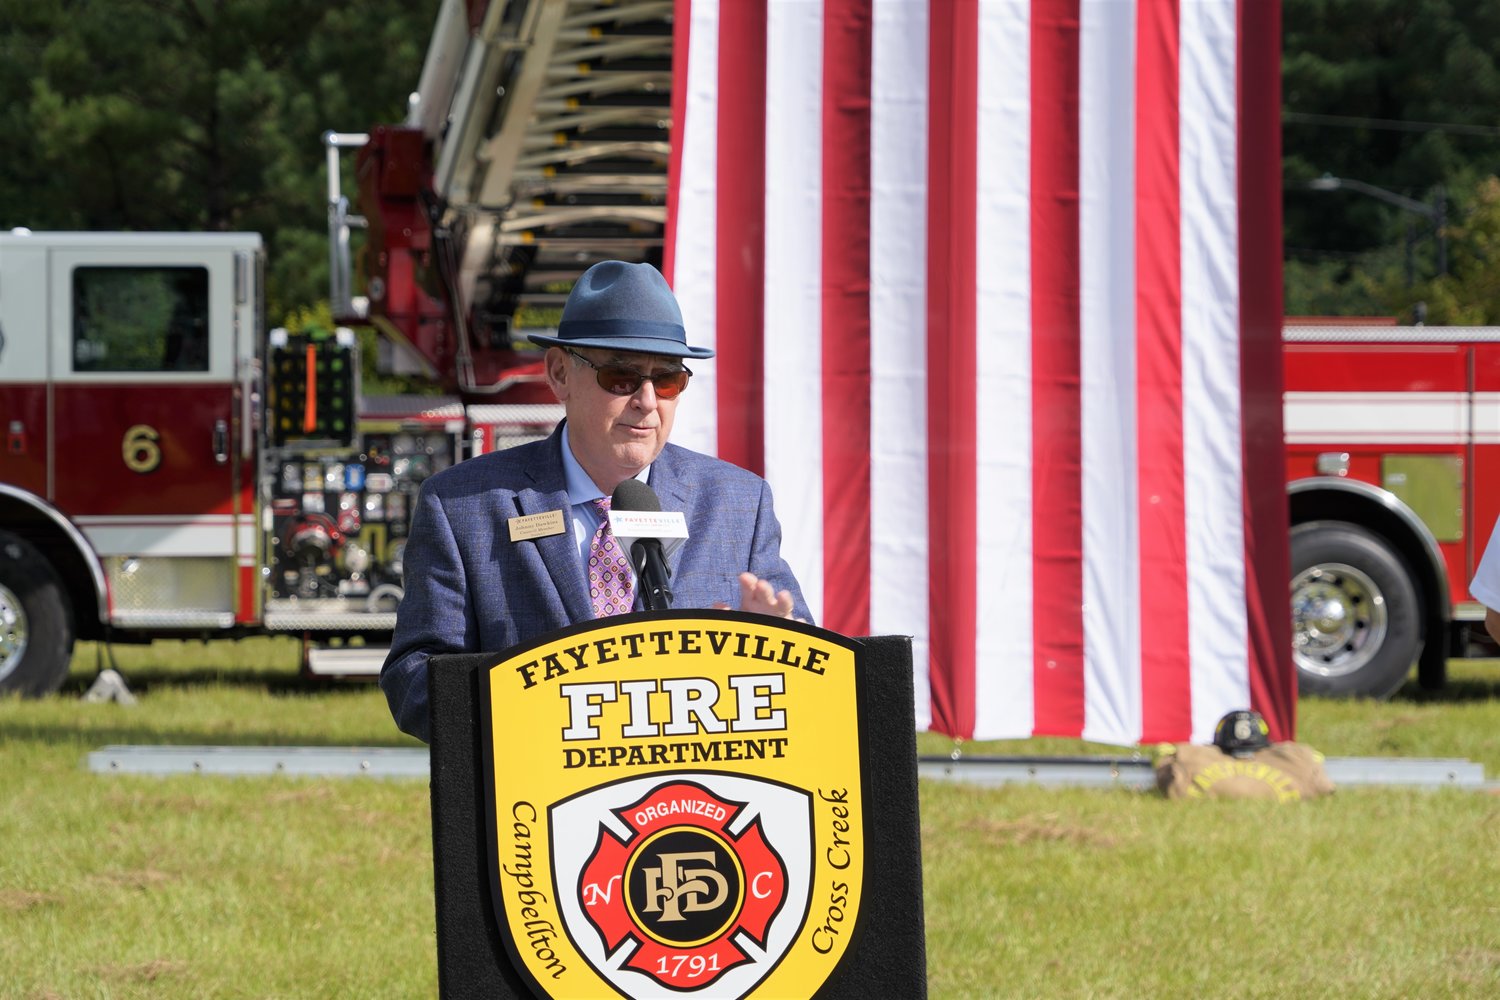 Fayetteville Fire Department officials and City Council members broke ground for a new Fire Station No. 4.